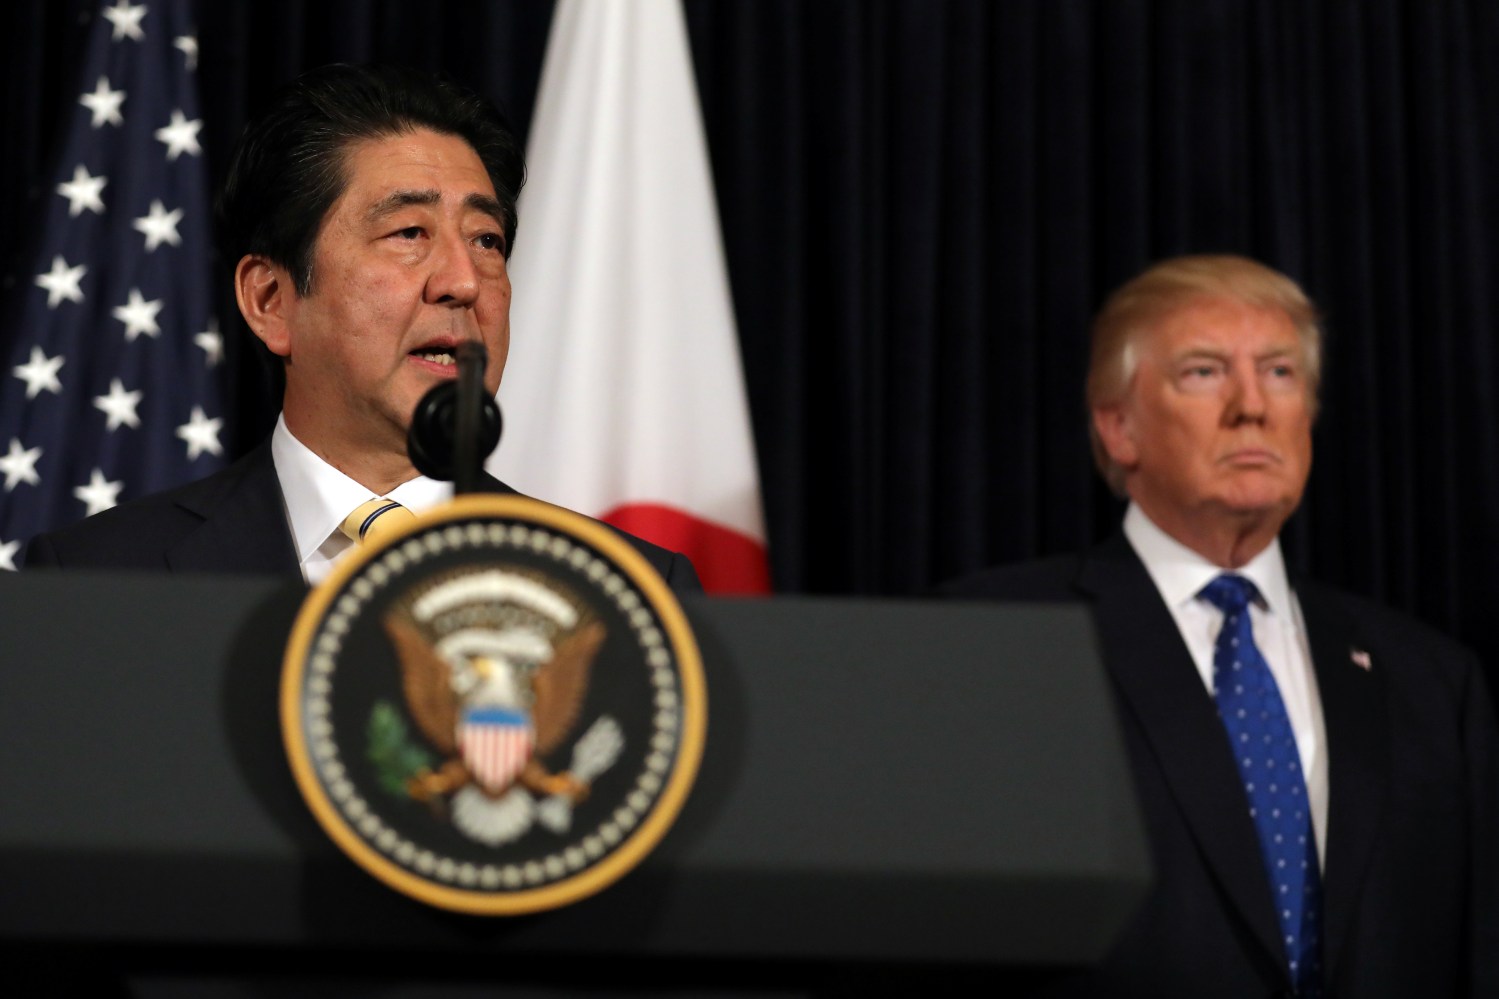 Japanese Prime Minister Shinzo Abe delivers remarks on North Korea accompanied by U.S. President Donald Trump at Mar-a-Lago club in Palm Beach, Florida U.S., February 11, 2017. REUTERS/Carlos Barria - RC1FD8CE5350